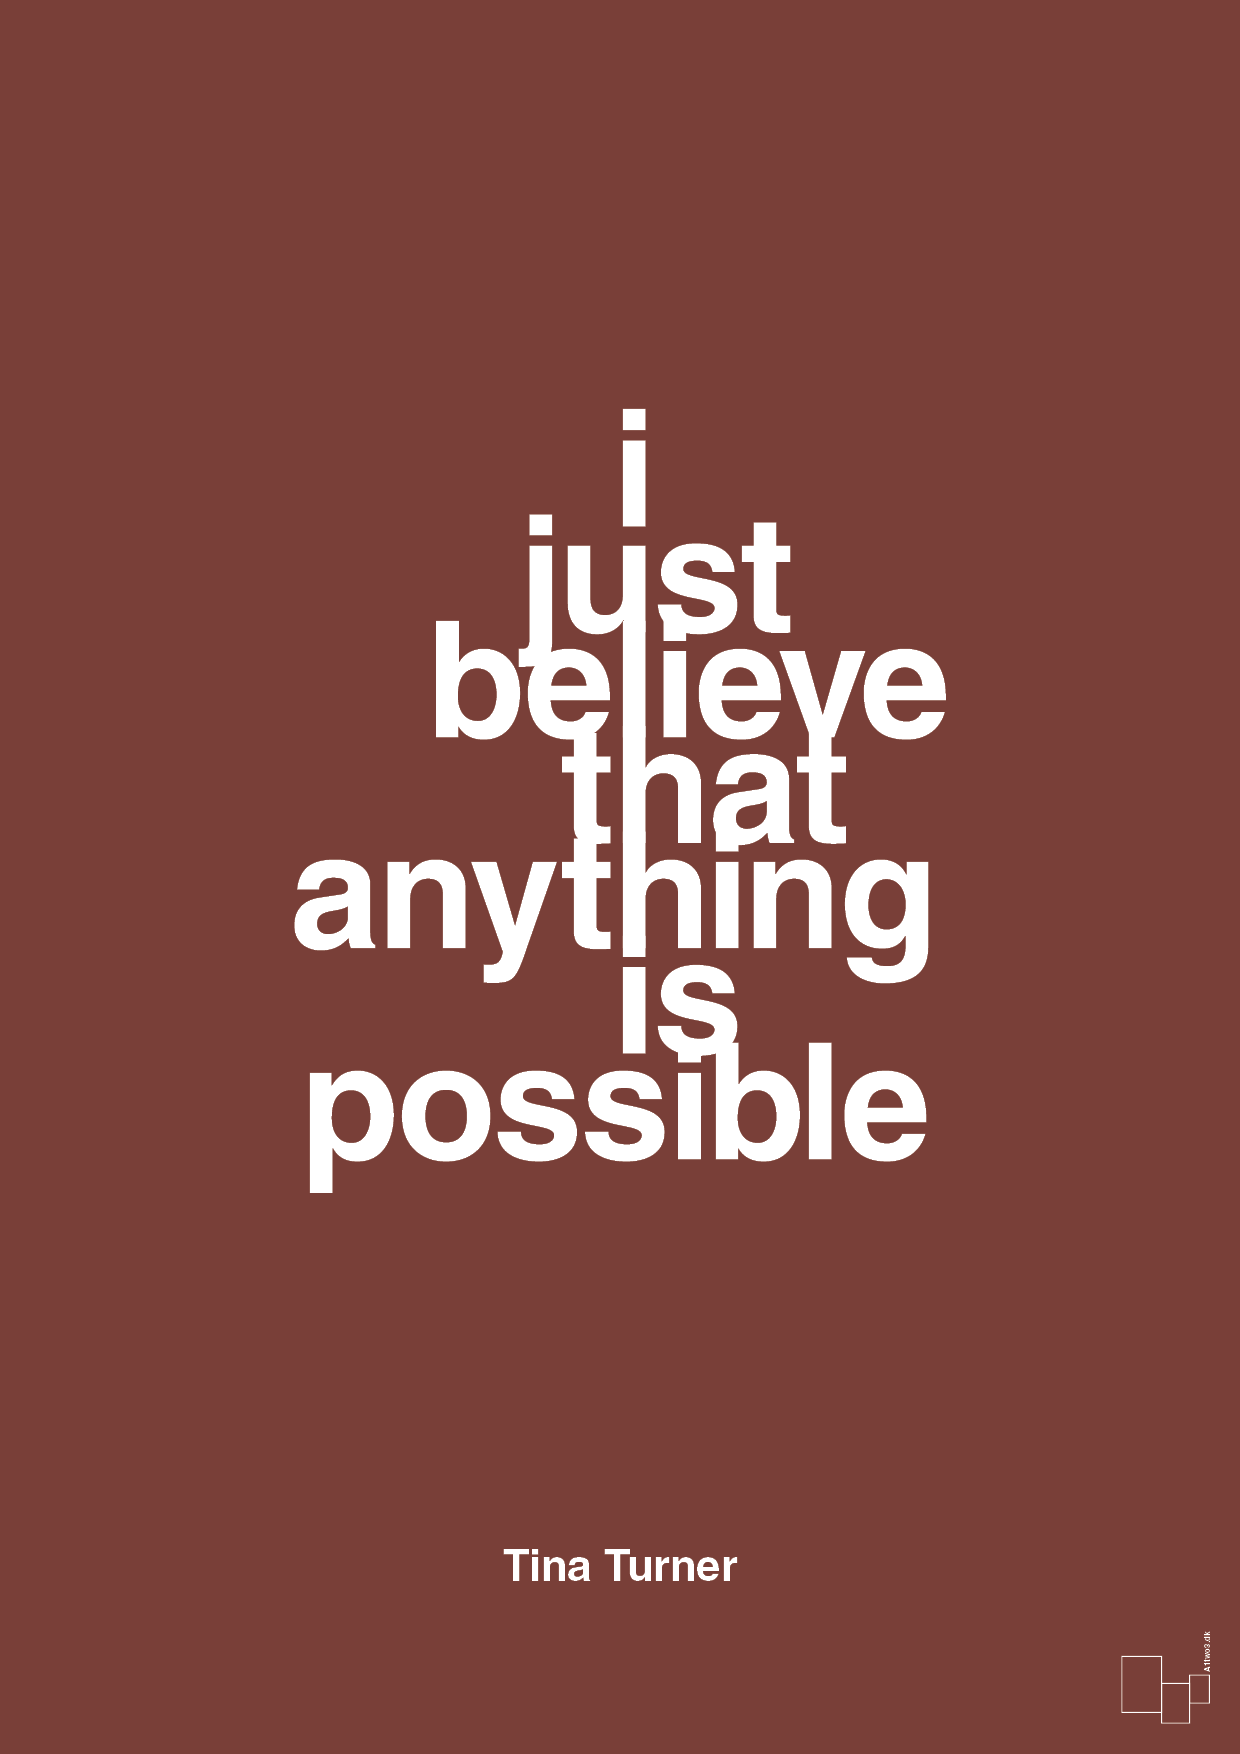 i just believe that anything is possible - Plakat med Citater i Red Pepper